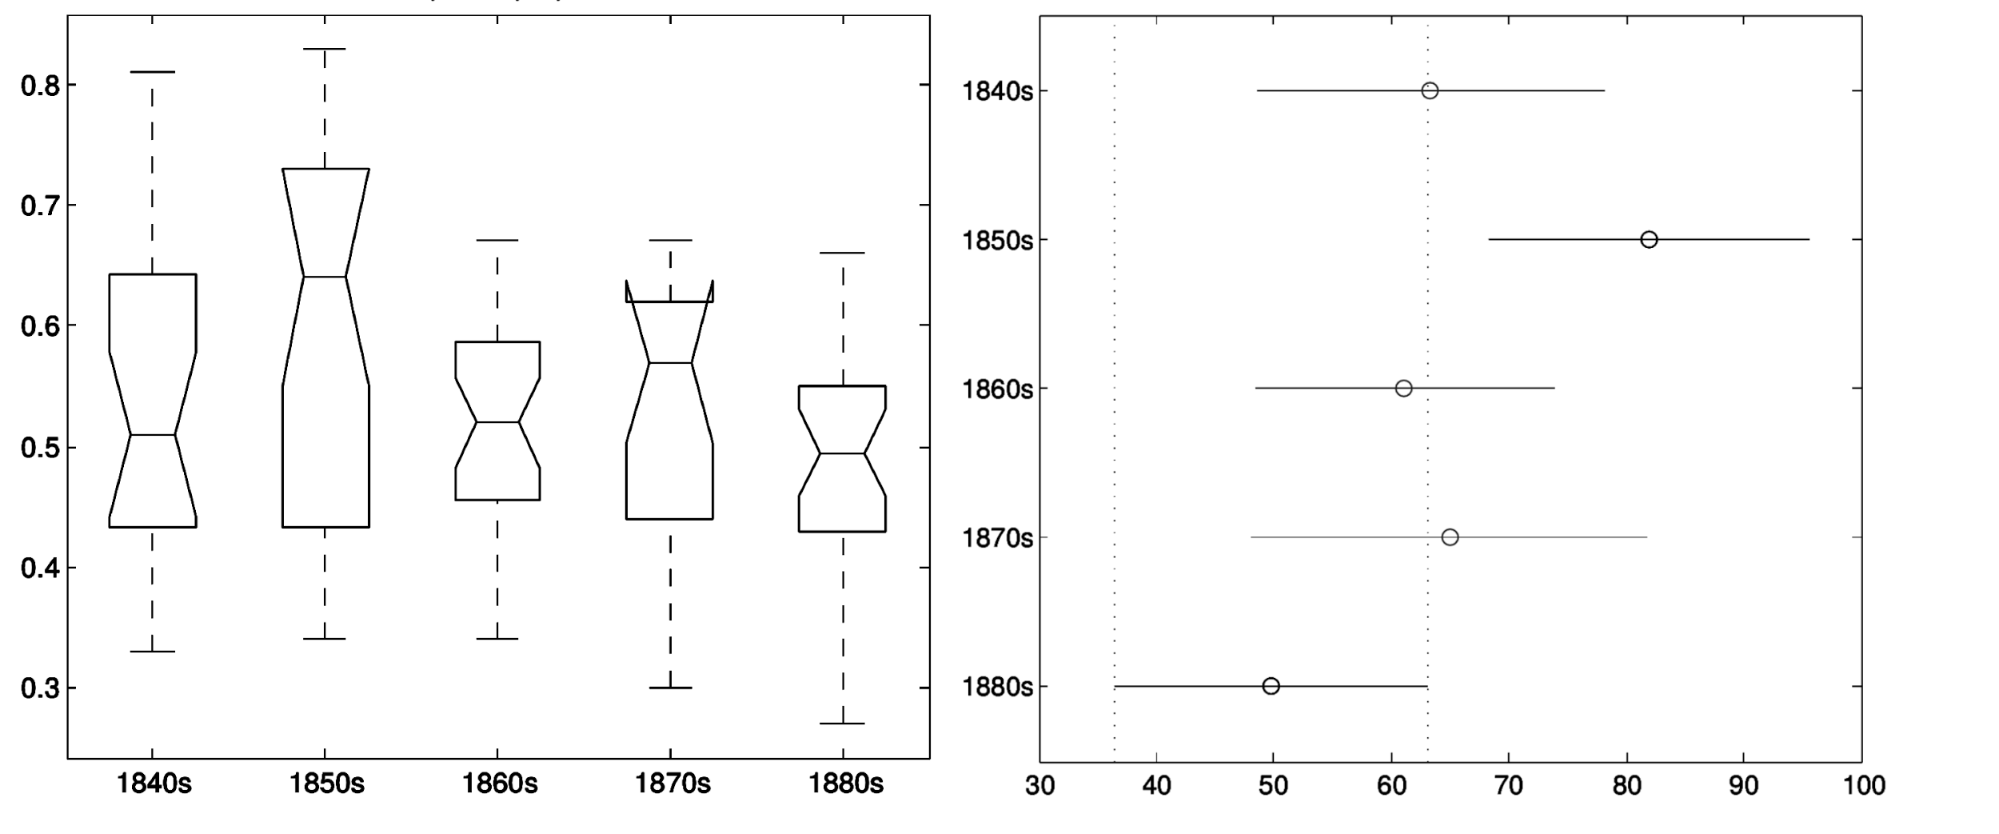 Figure 5: Distribution (left) and significance (right) of direct to non-direct speech ratios across five decades